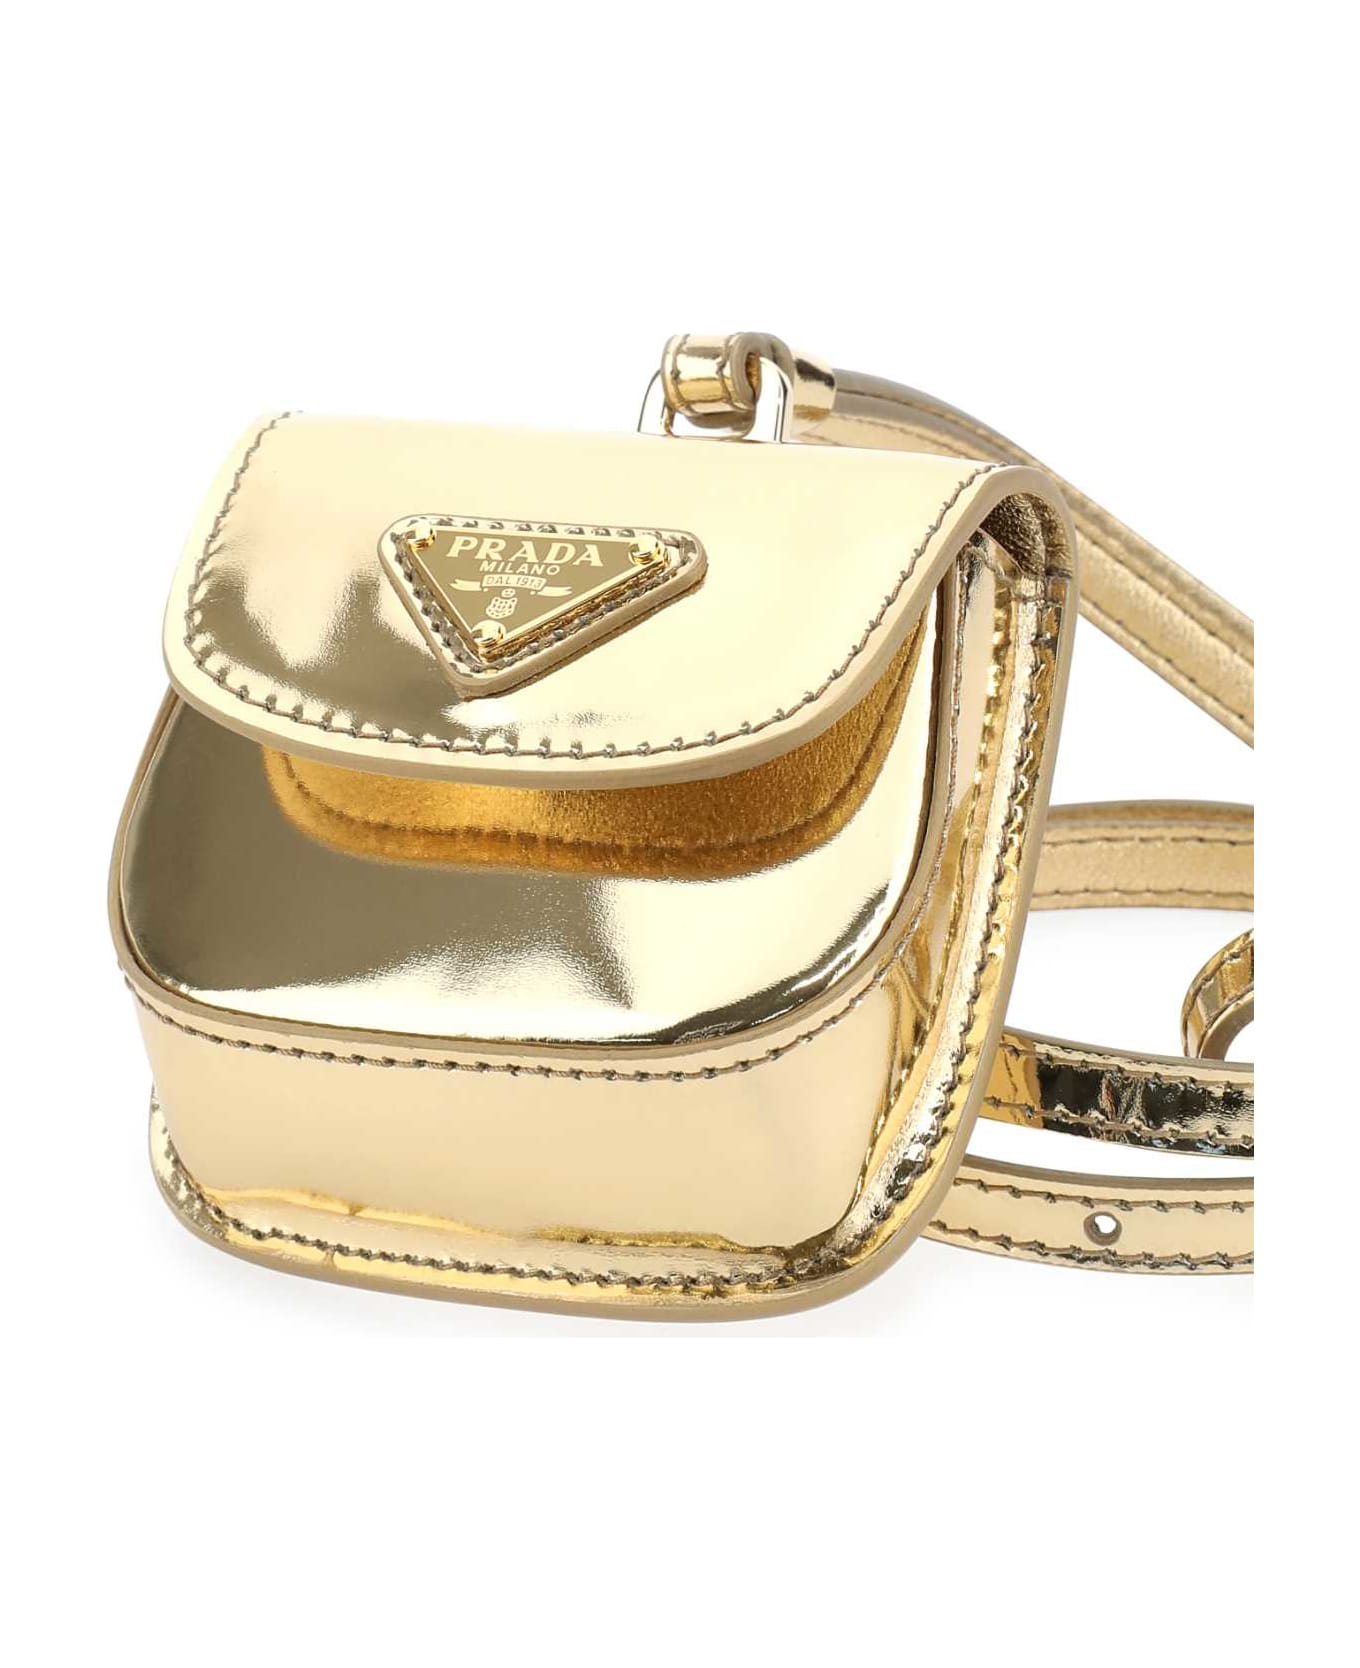 Prada Gold Leather Air Pods Case - Silver